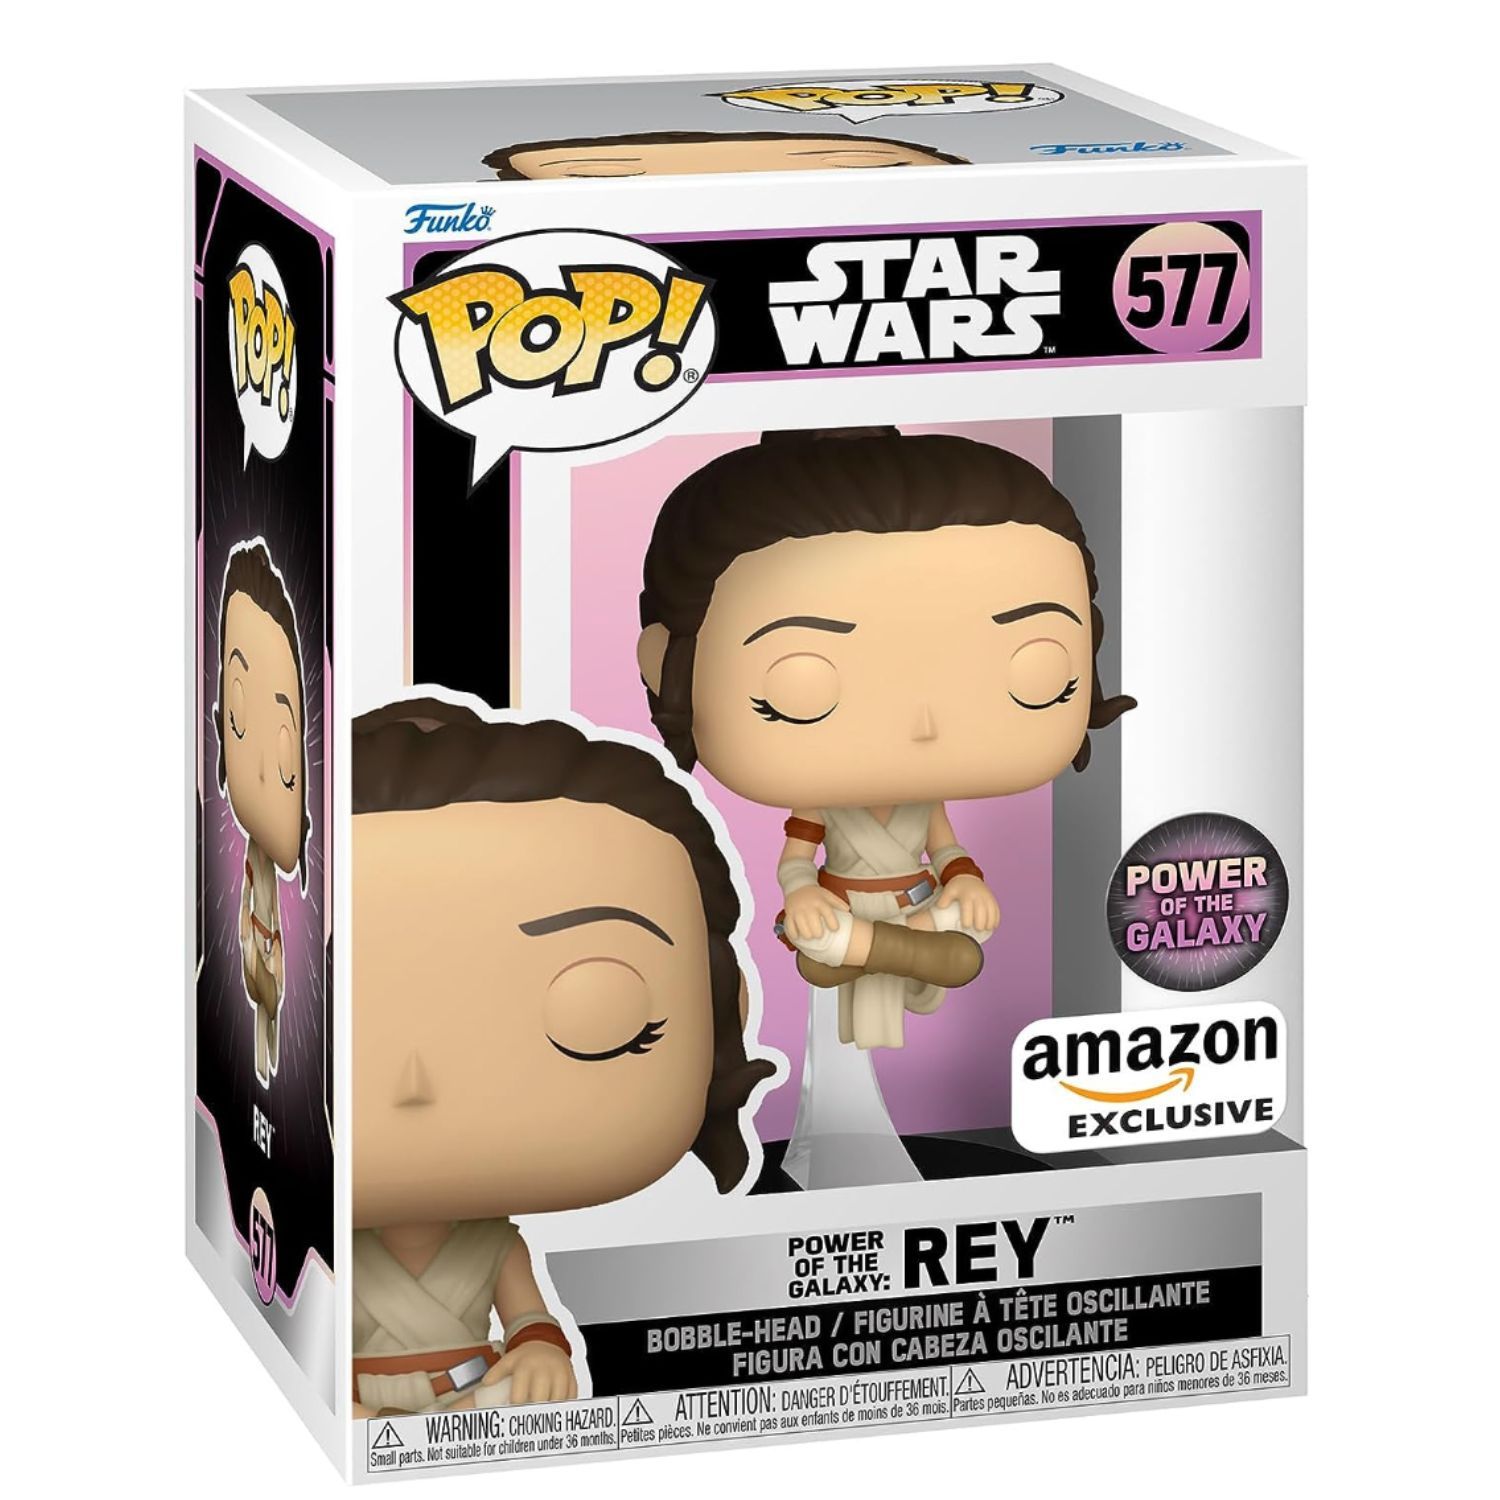 These Star Wars Funko Pop! Are On Sale Today - Up to 67% Off!